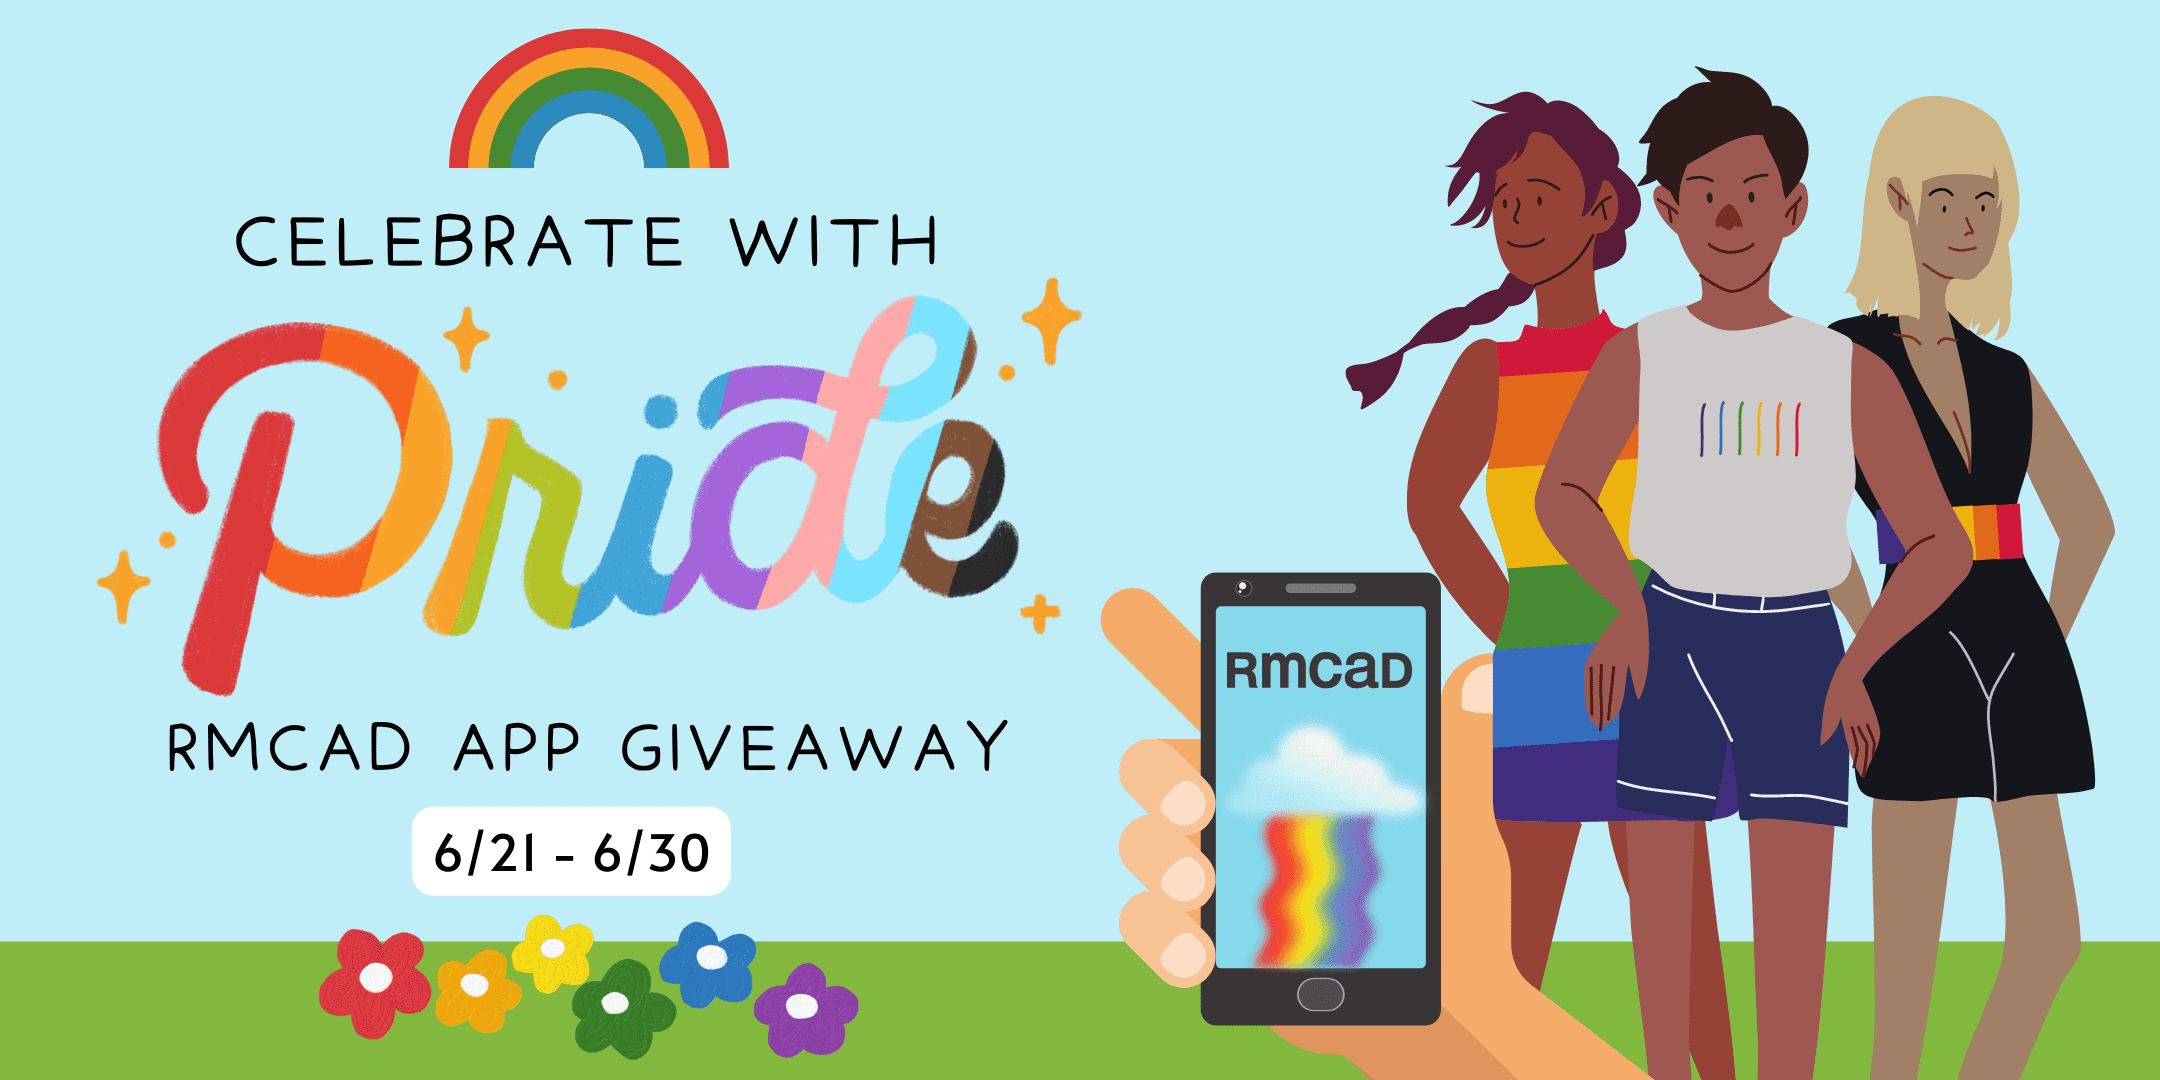 Celebrate with Pride - App Giveaway